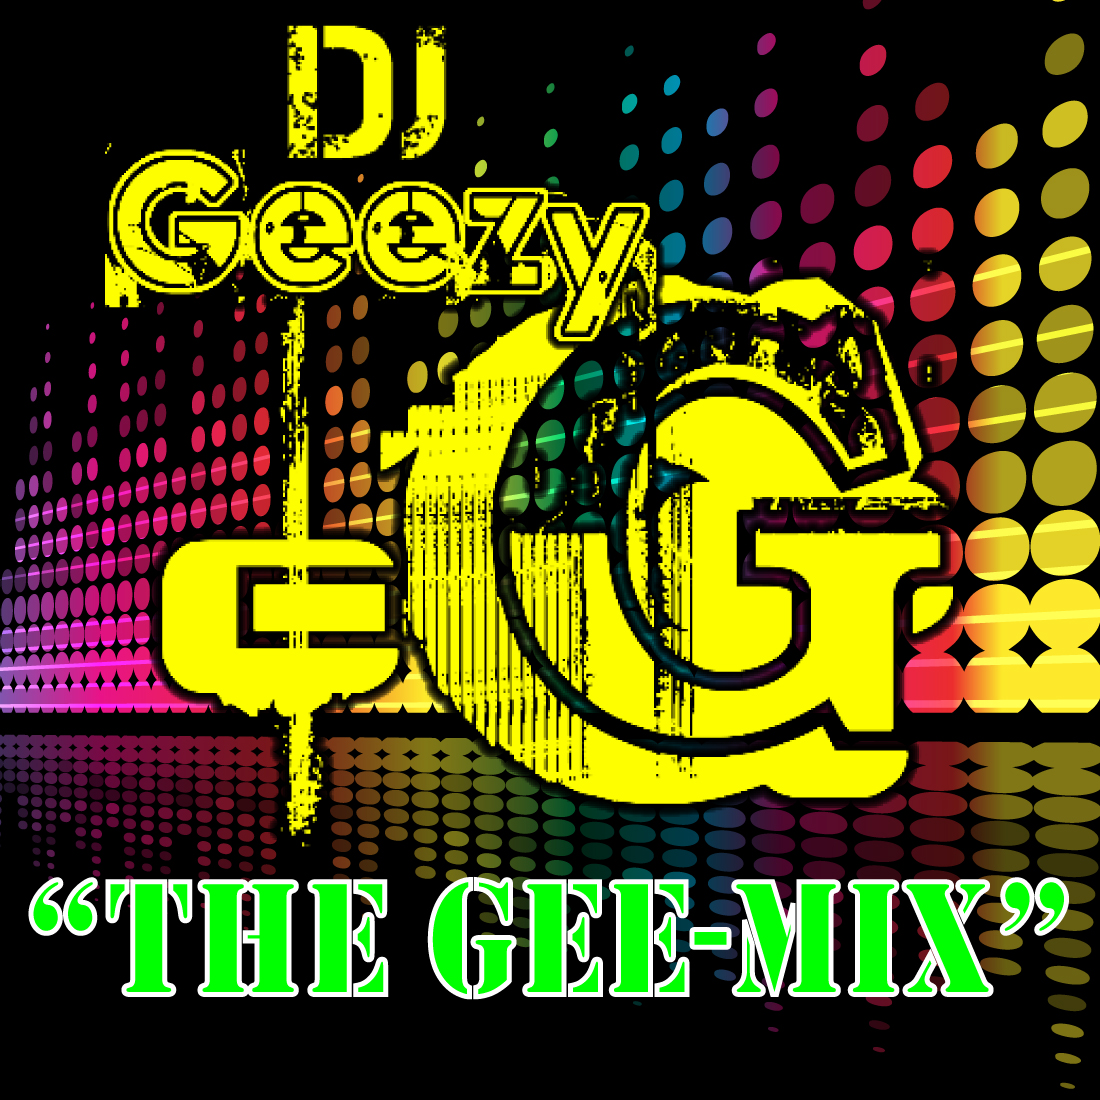 DJ GEEZY G "THE GEE-MIX" (MARCH 11, 2012) PART (ii)